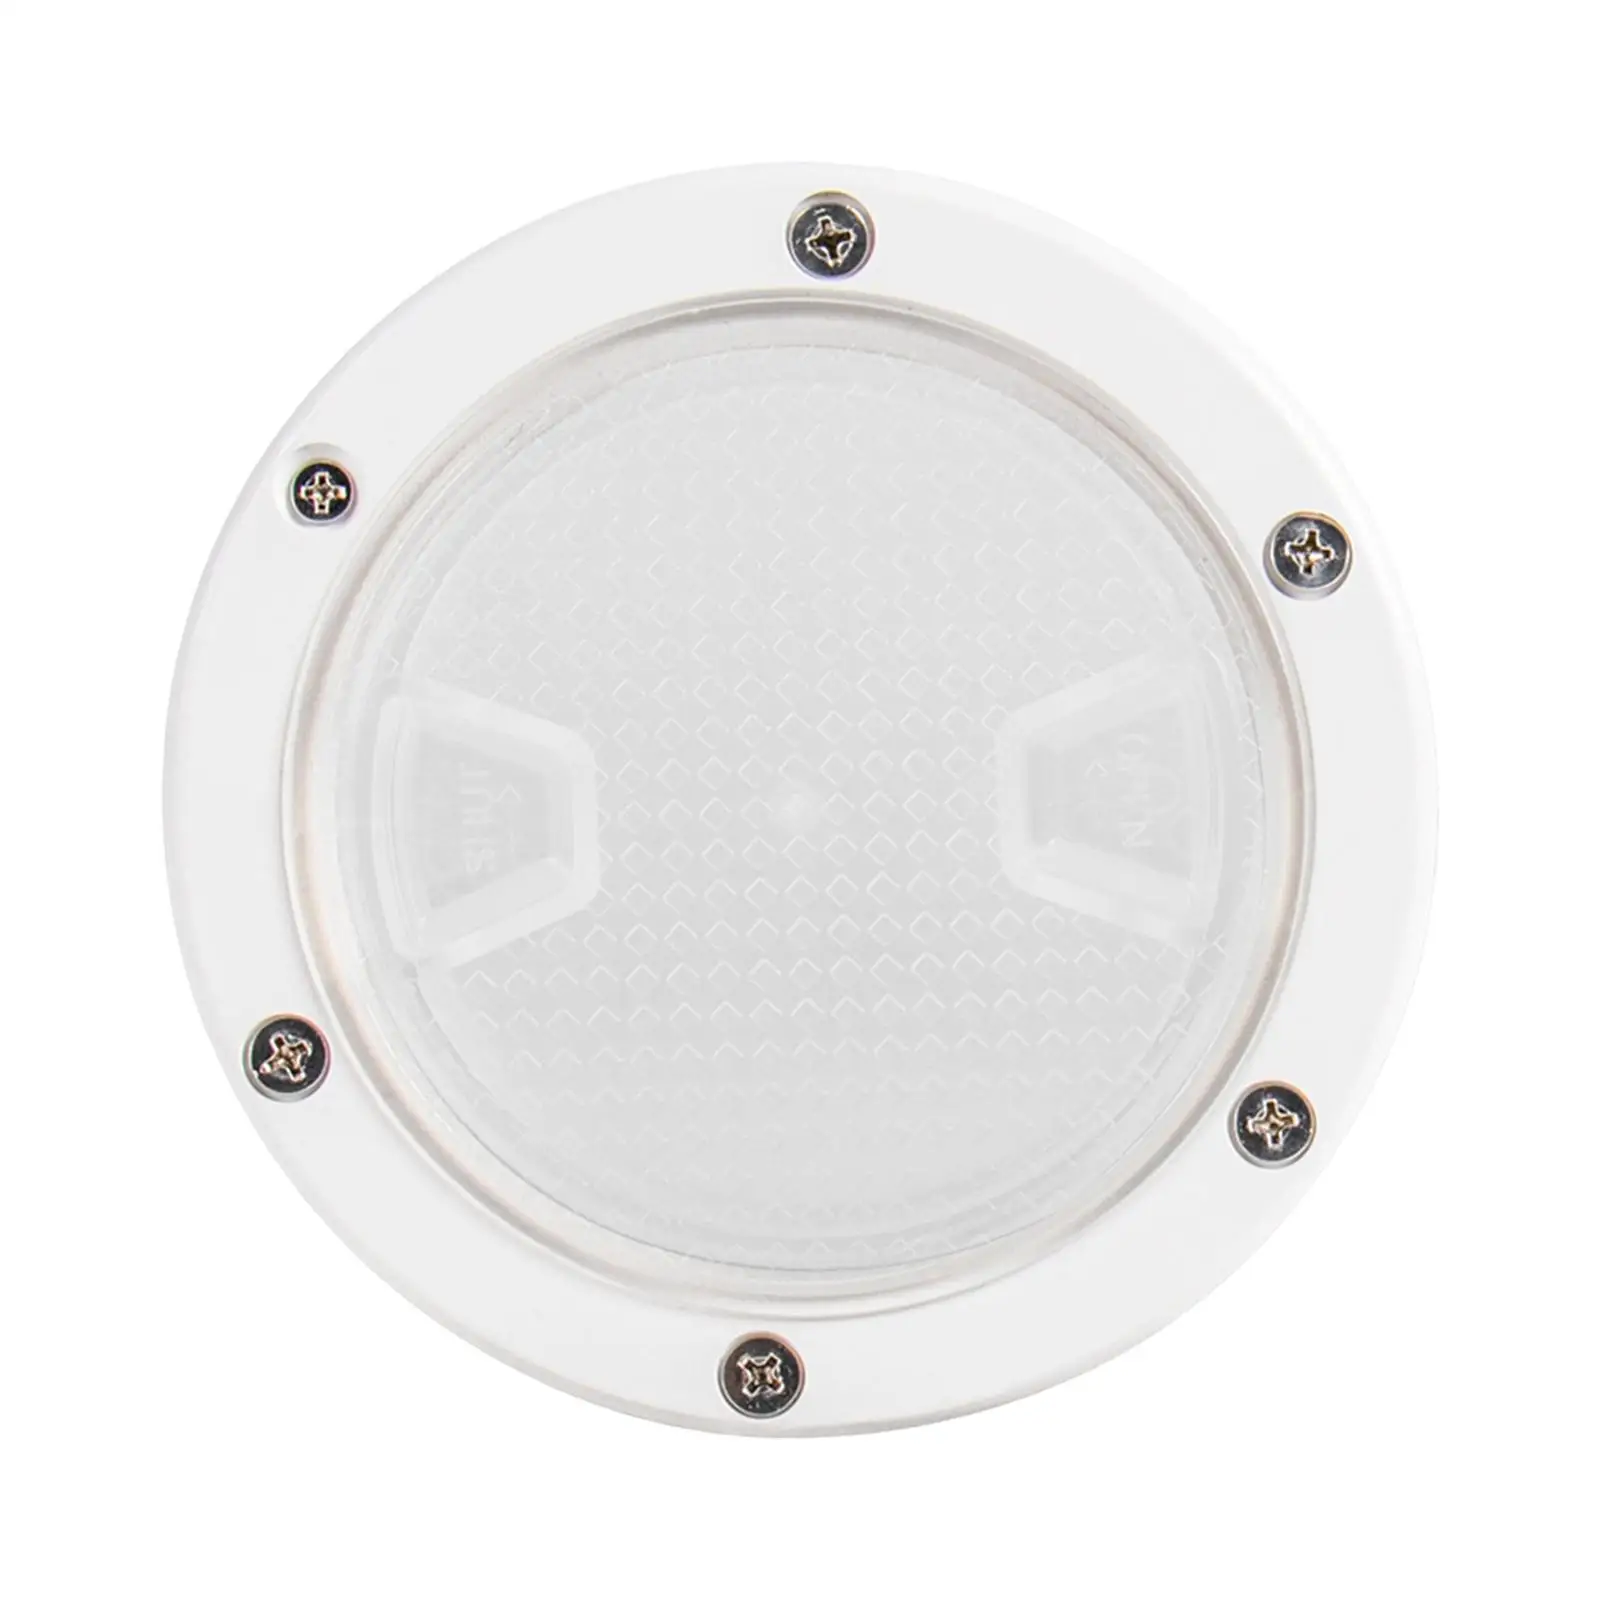 Boat Plate, Yacht accessories ,Easy to Install ,Marine Access for Yacht ,Fishing Boat